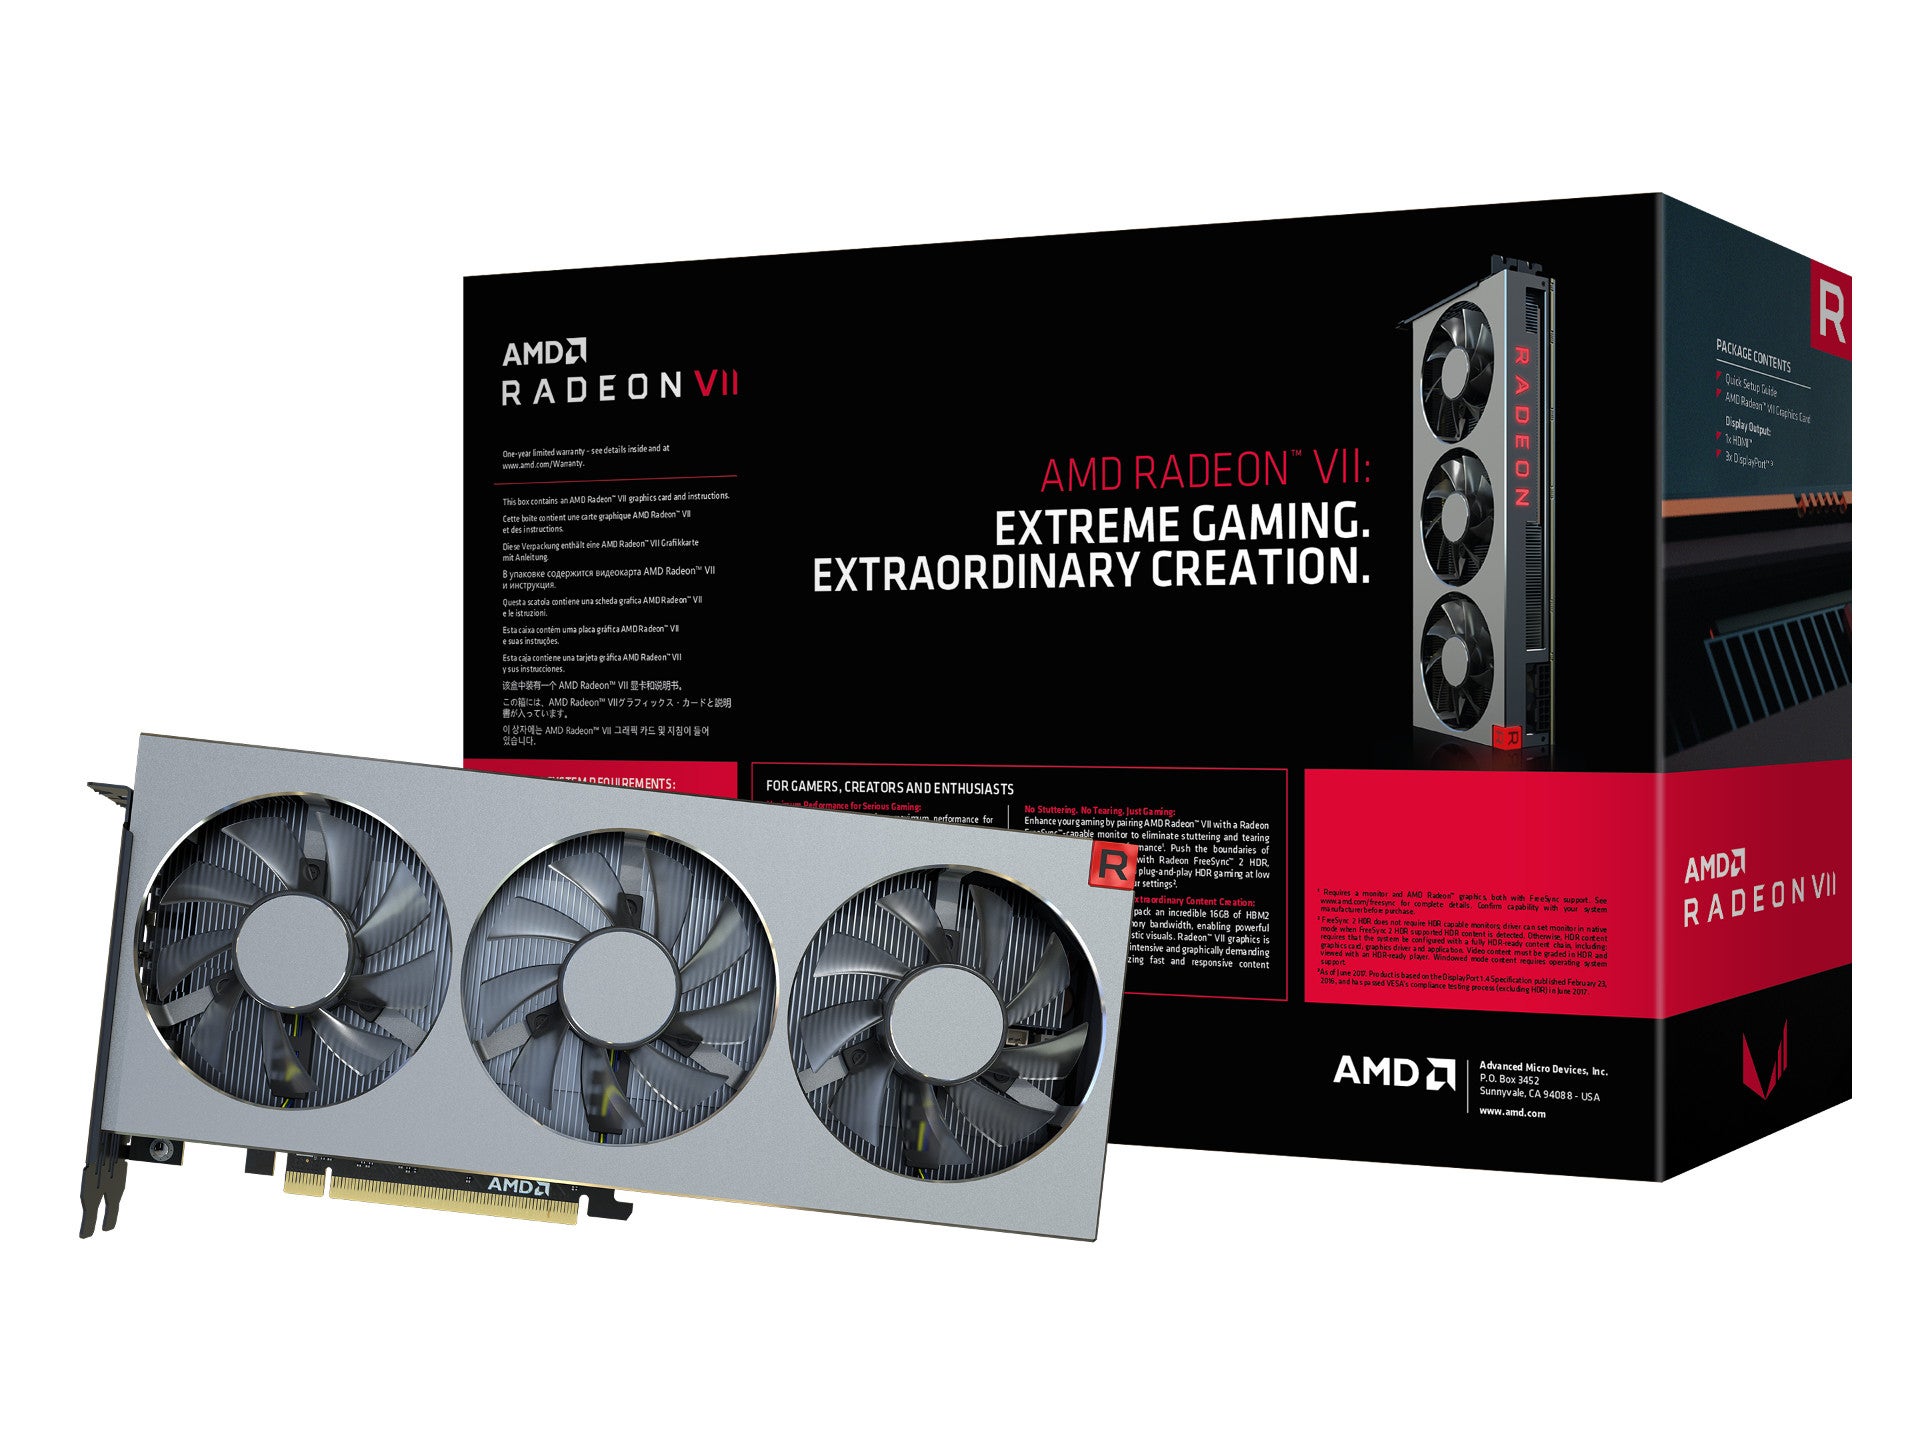 AMD Radeon VII 16 GB review (updated) - Comments (Page 4)